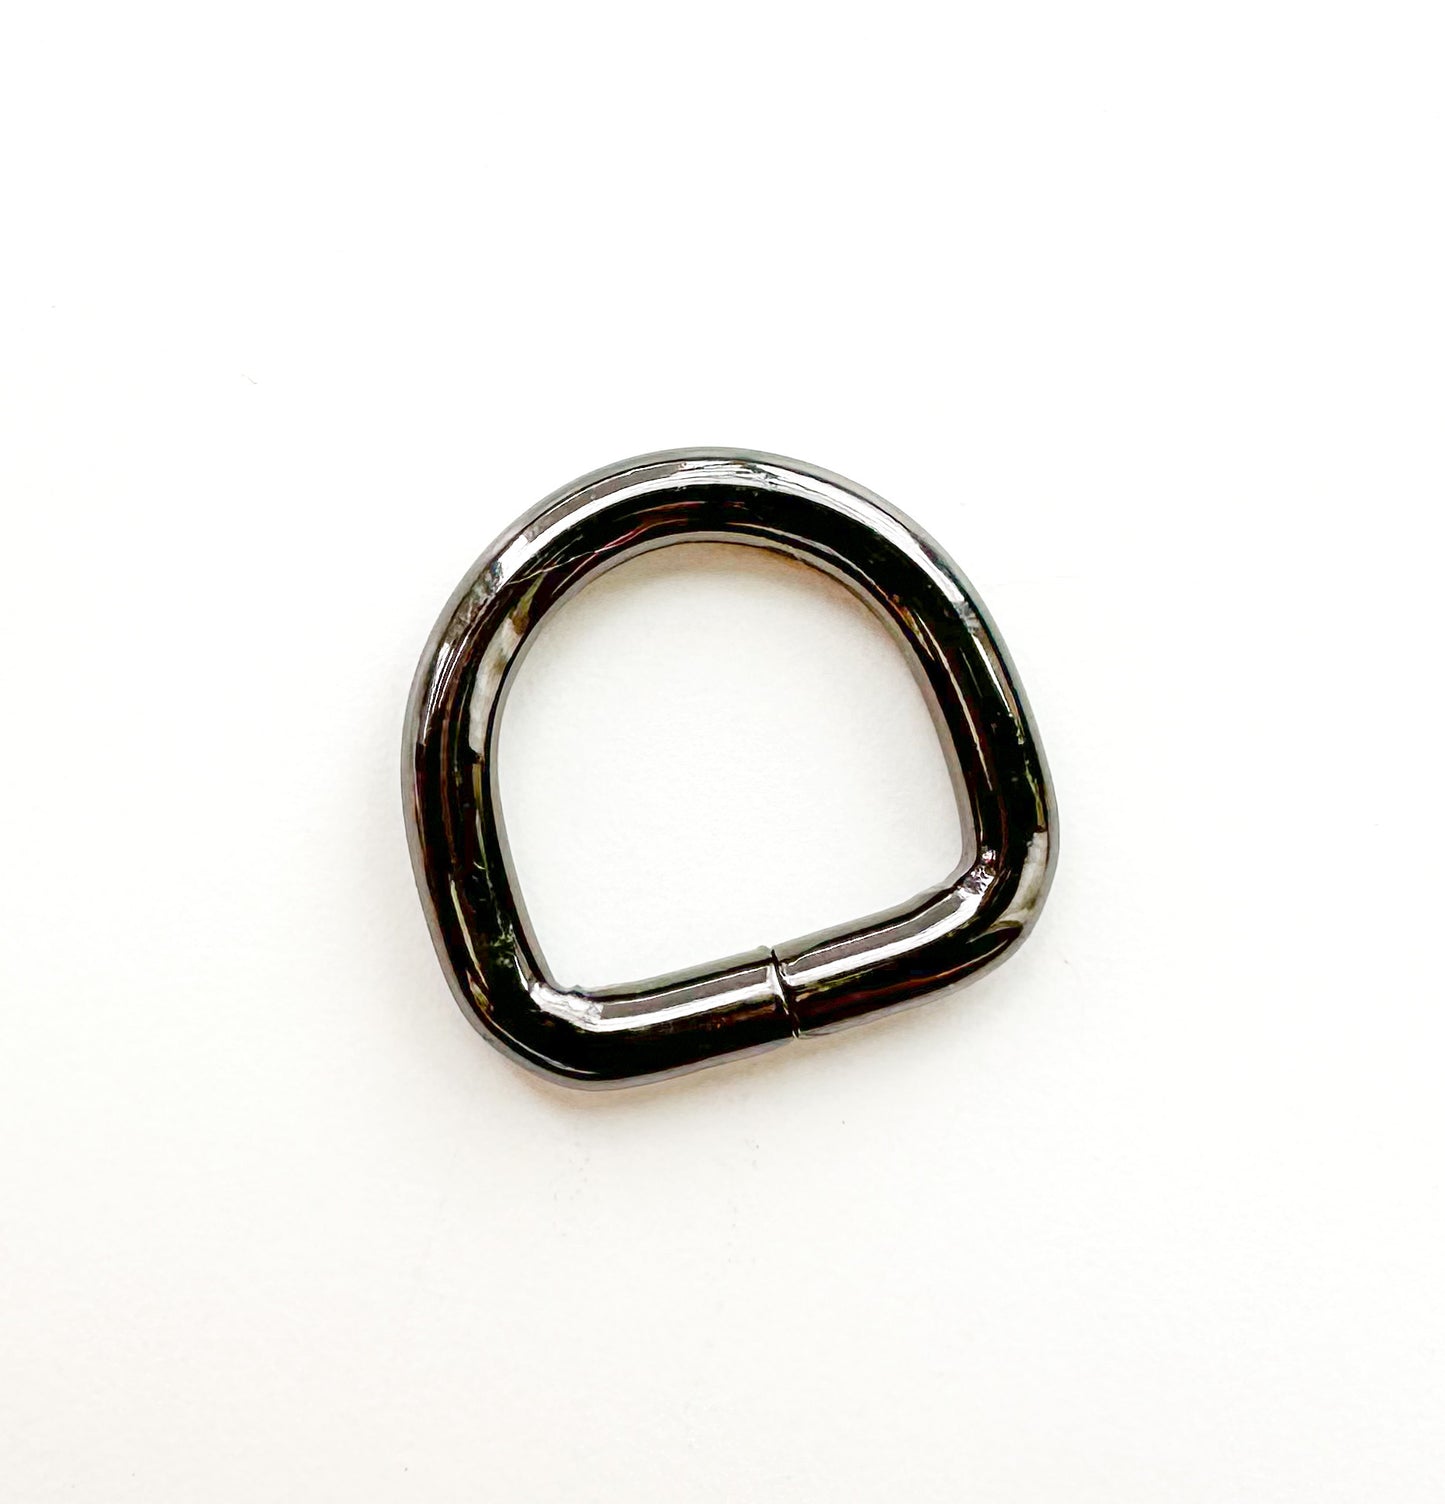 D-ring size: 3/4” (20mm)